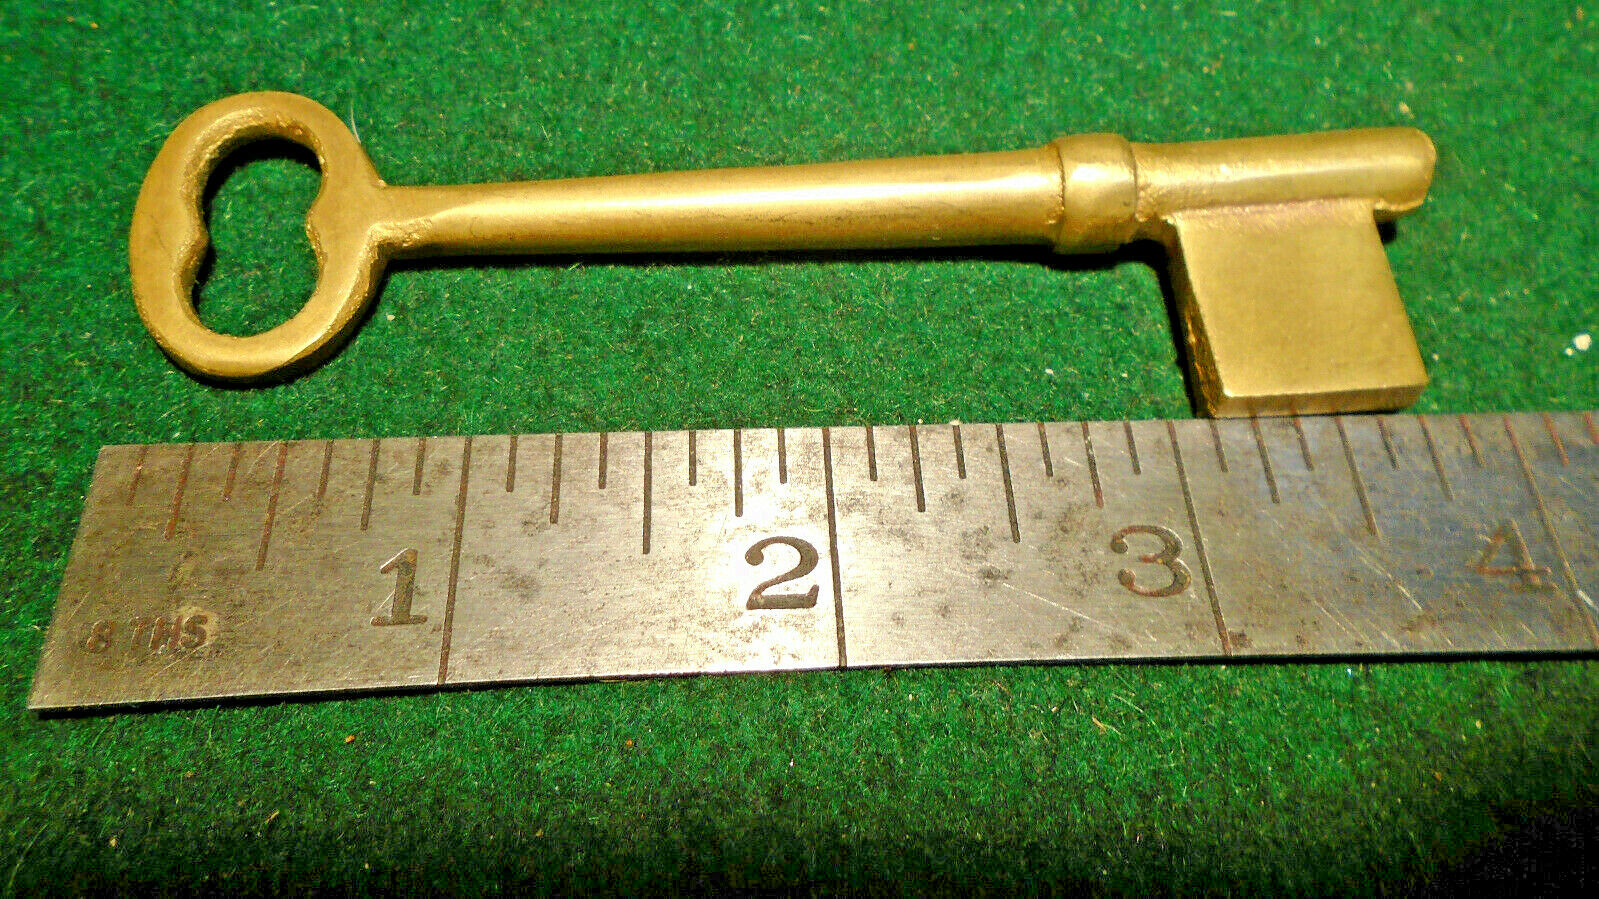 3 7/8" BRASS BIT KEY BLANK with TAPERED END - PERFECT for OLD RIM LOCKS (33090)